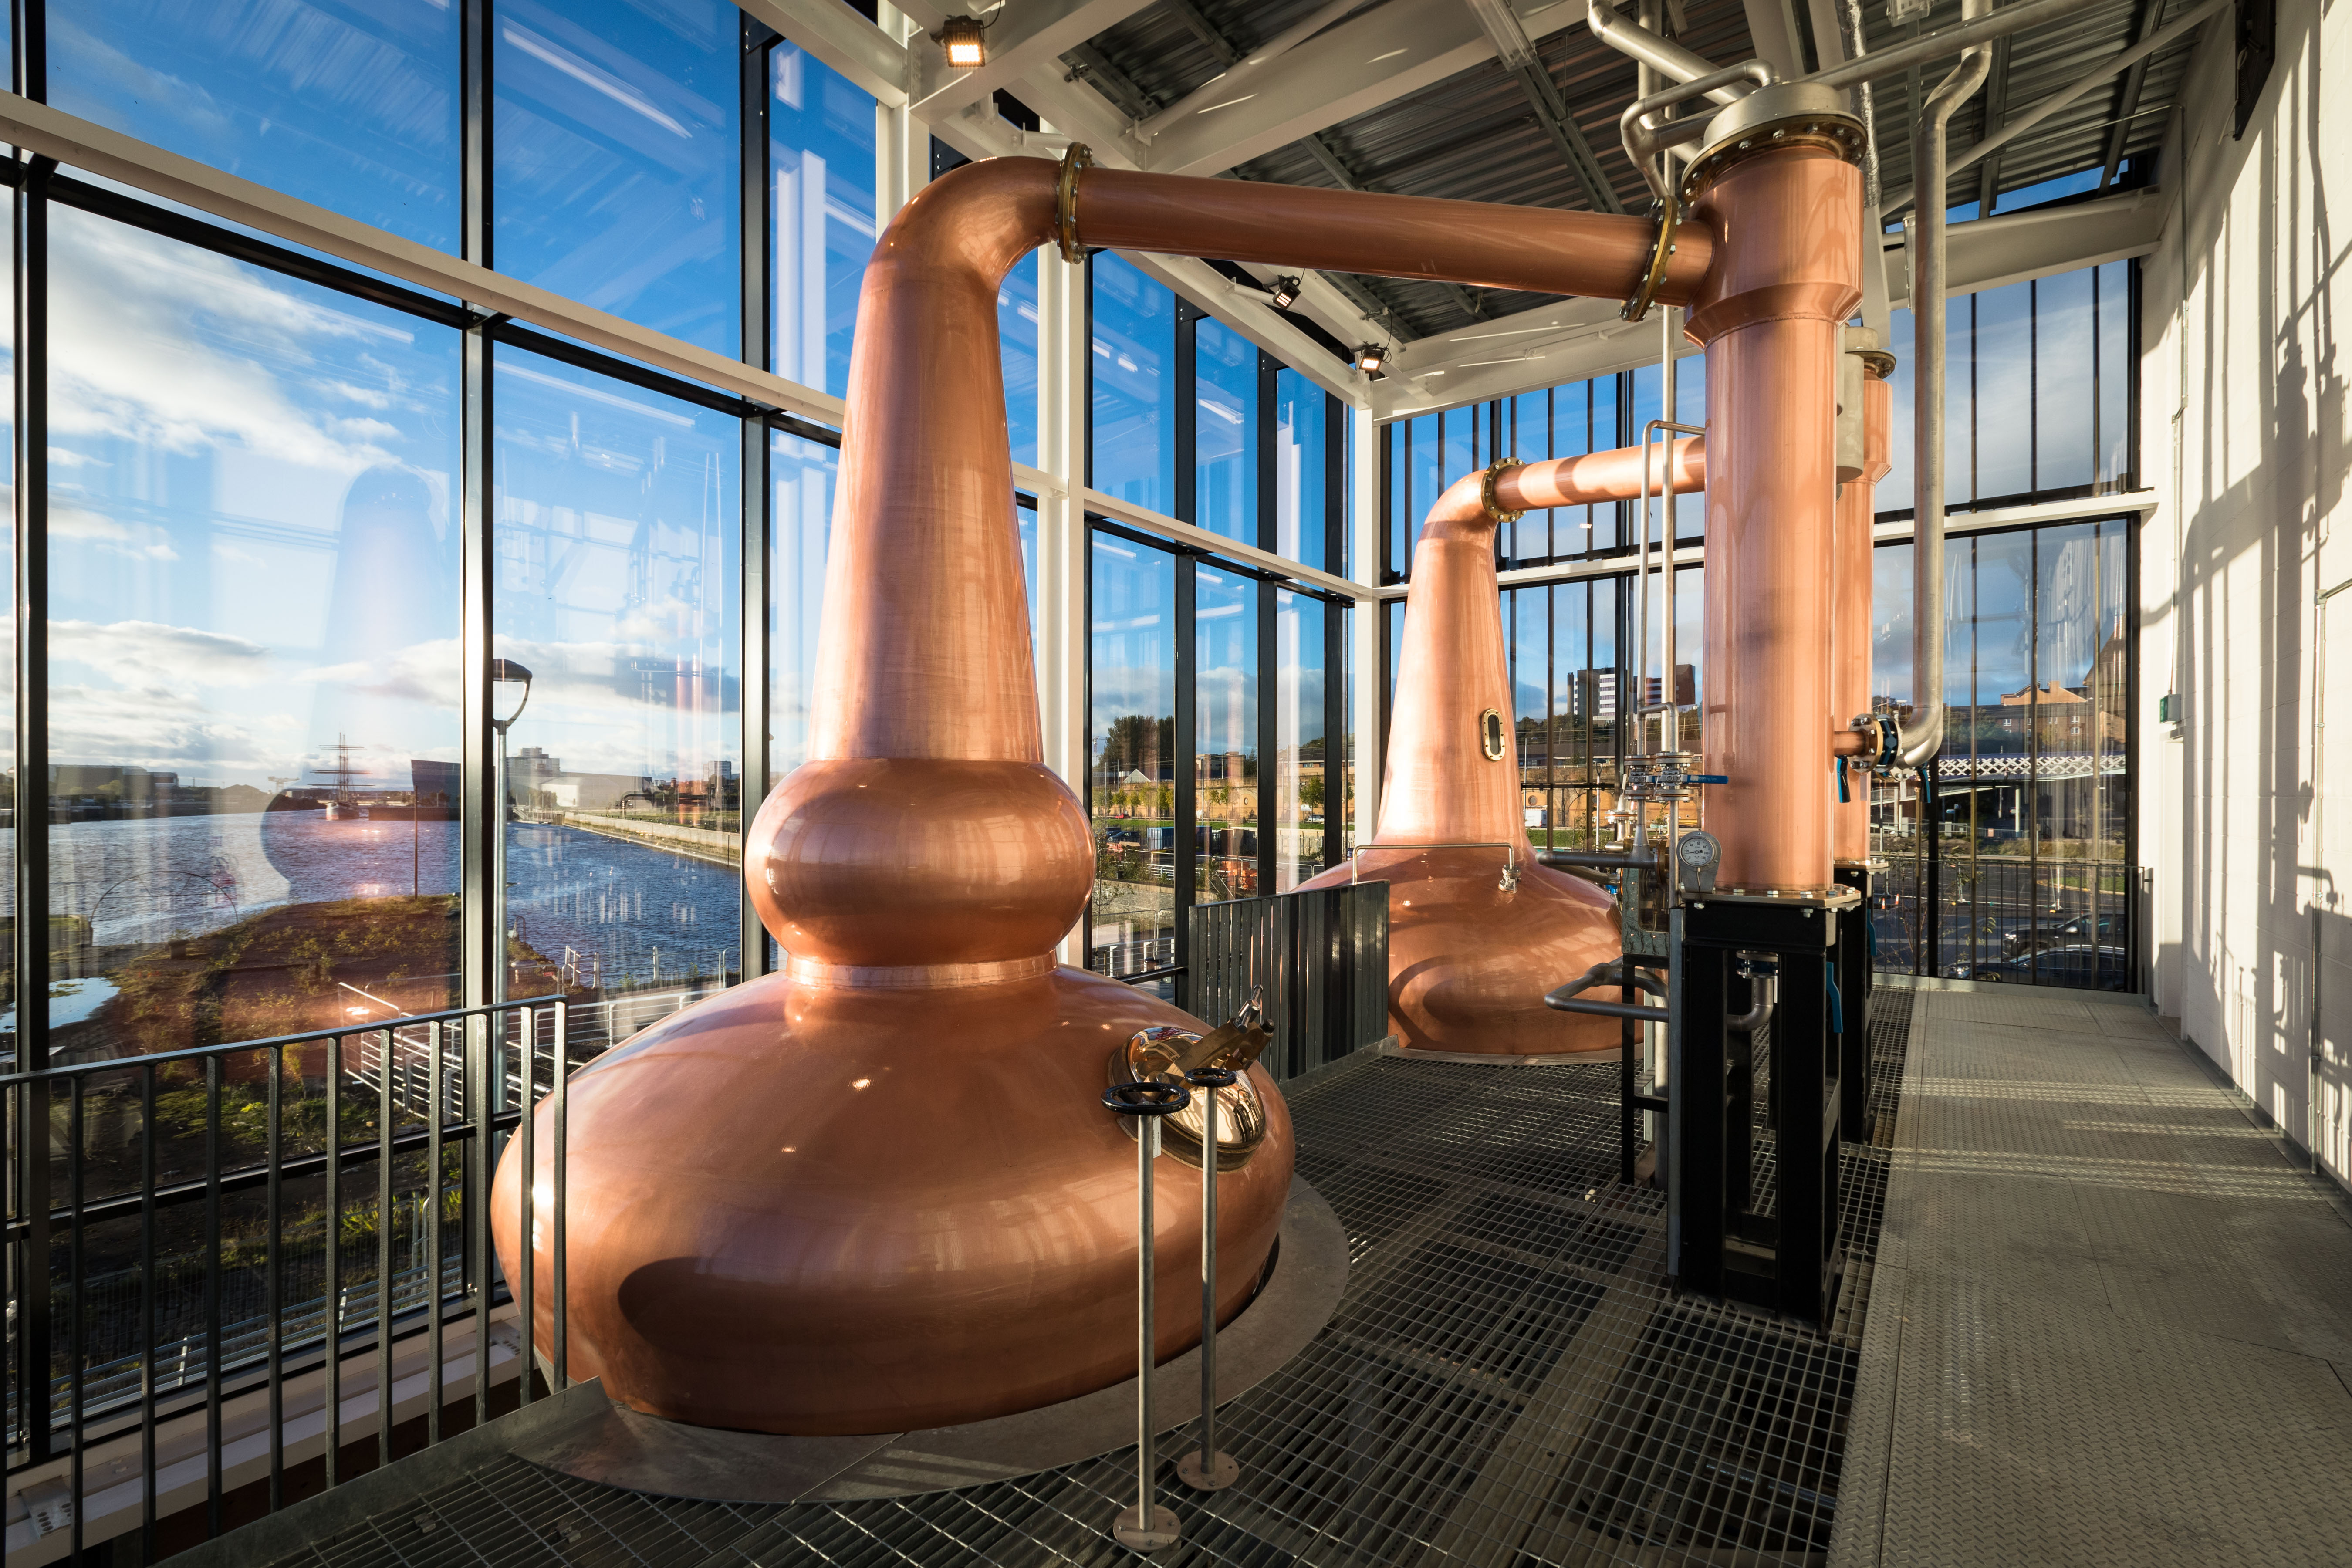 The Clydeside Distillery’s glass encased Still House with two copper stills